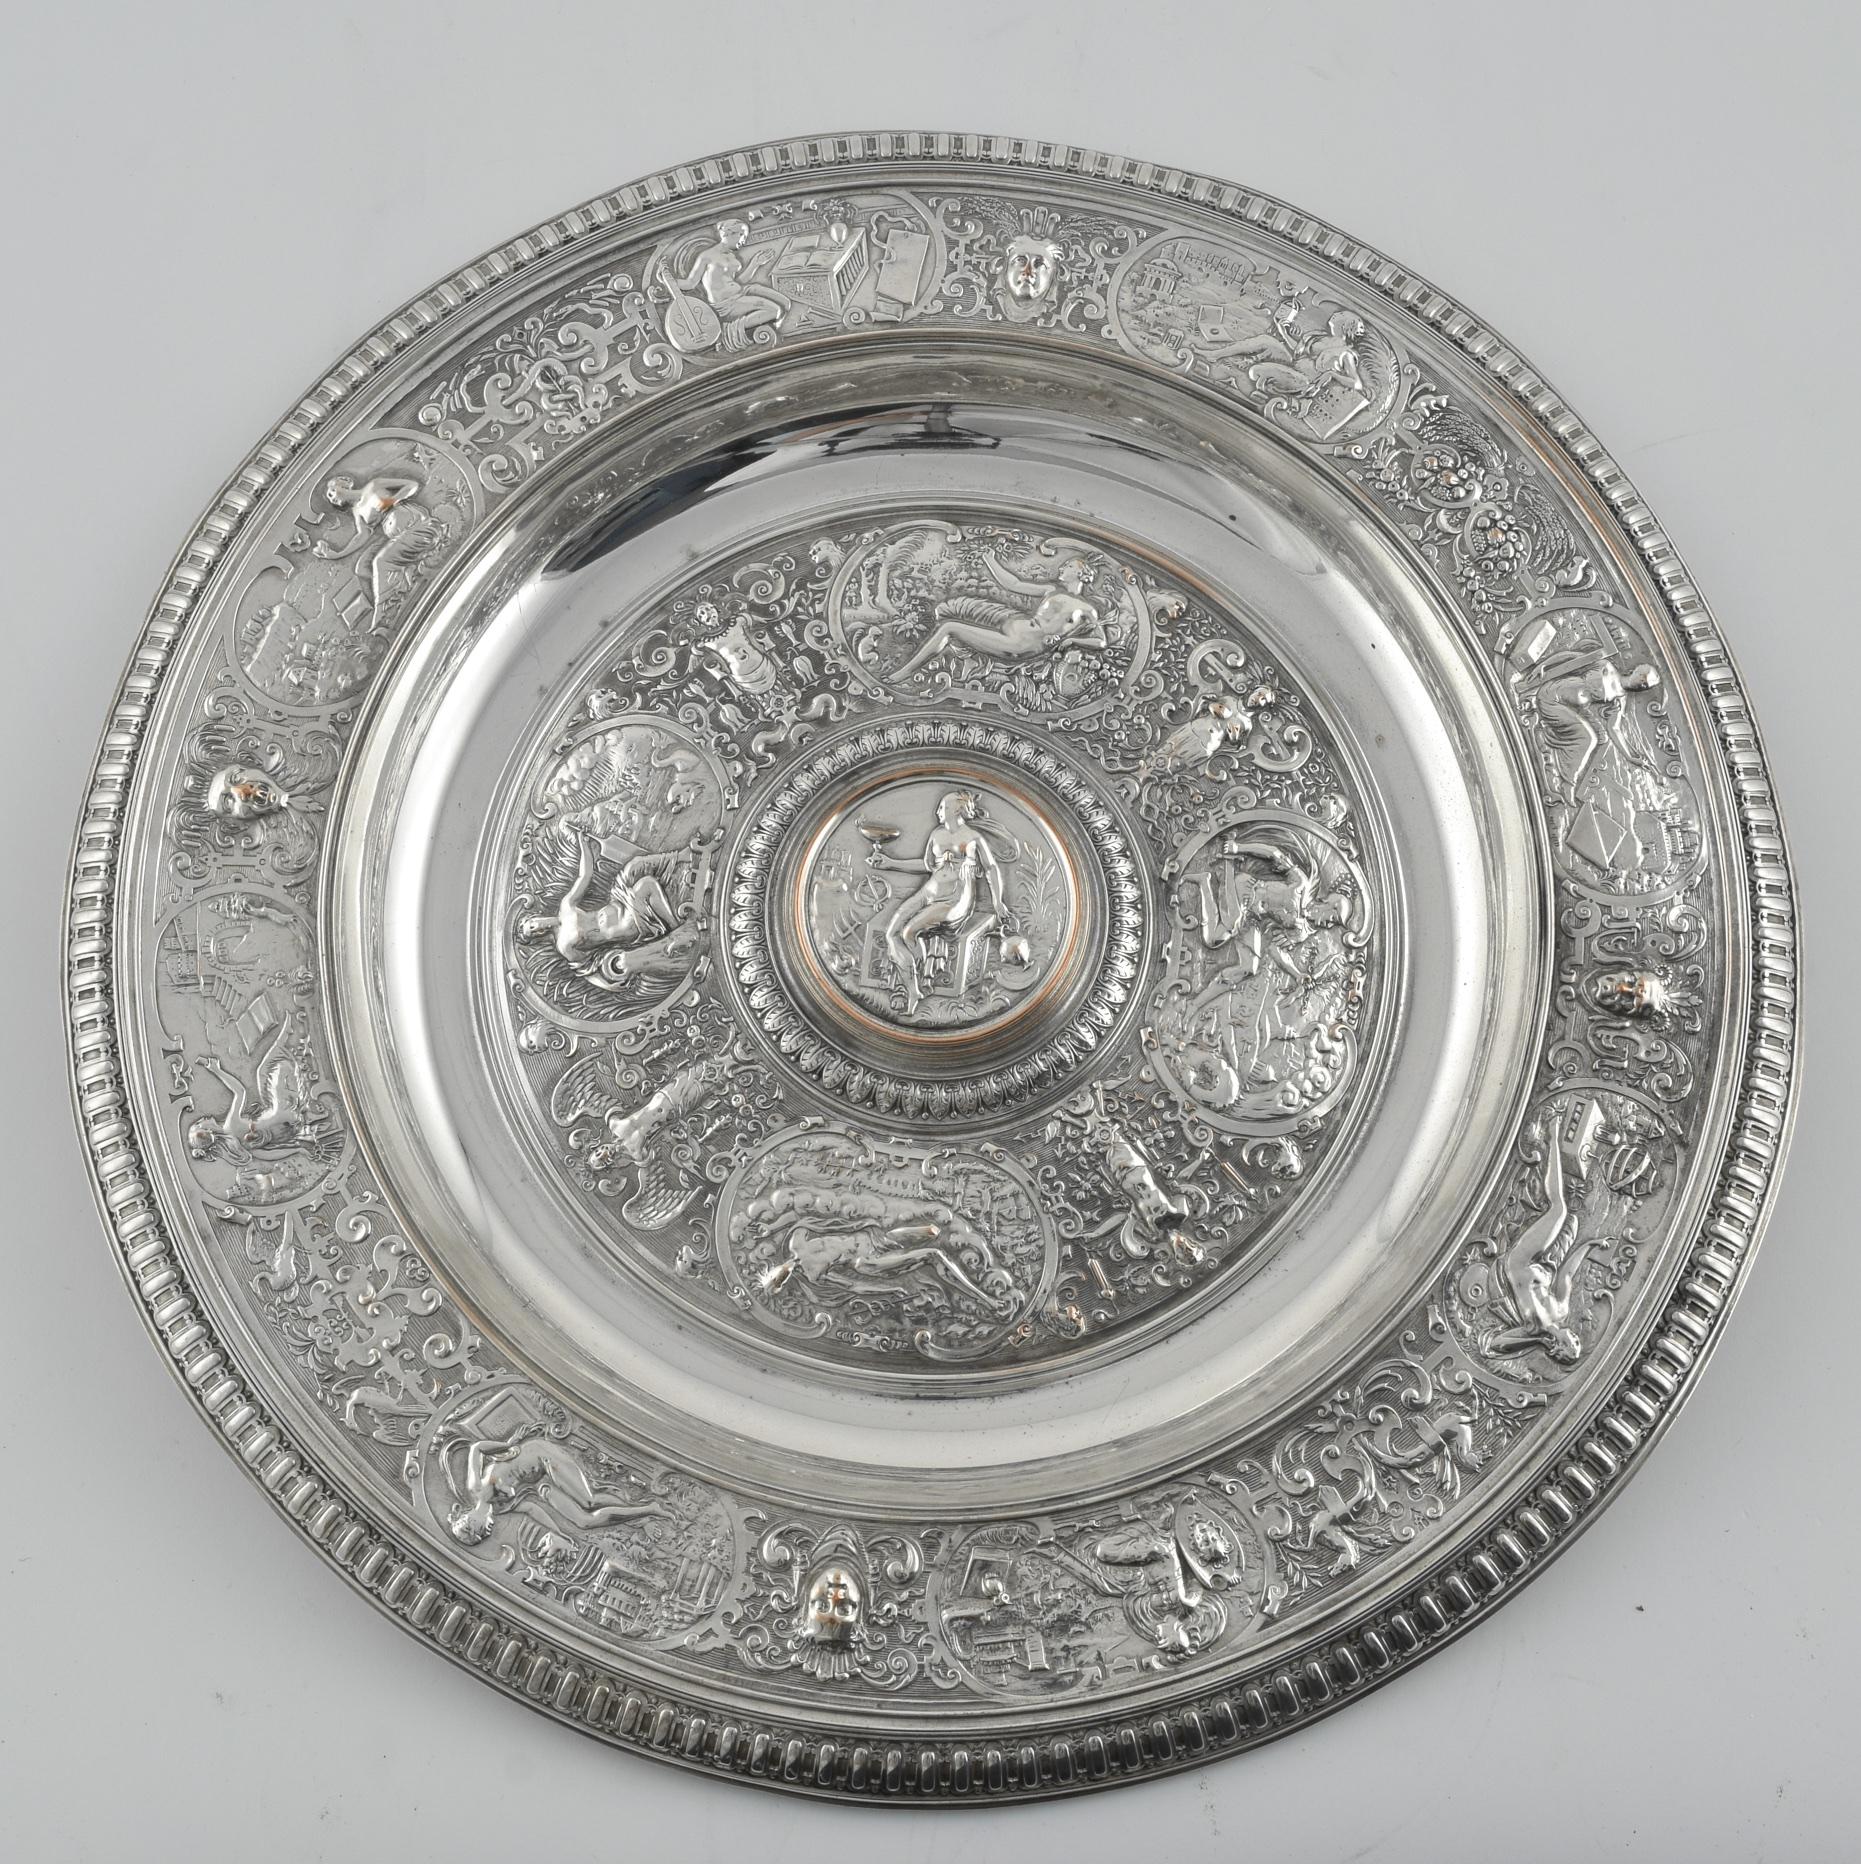 The original Temperance Basin was made by François Briot around 1585 and was acquired by the V&A in 1855. The most notable reproduction is the silver gilt Wimbledon Ladies Singles Championship trophy made by Elkington and Co in 1864, and has been